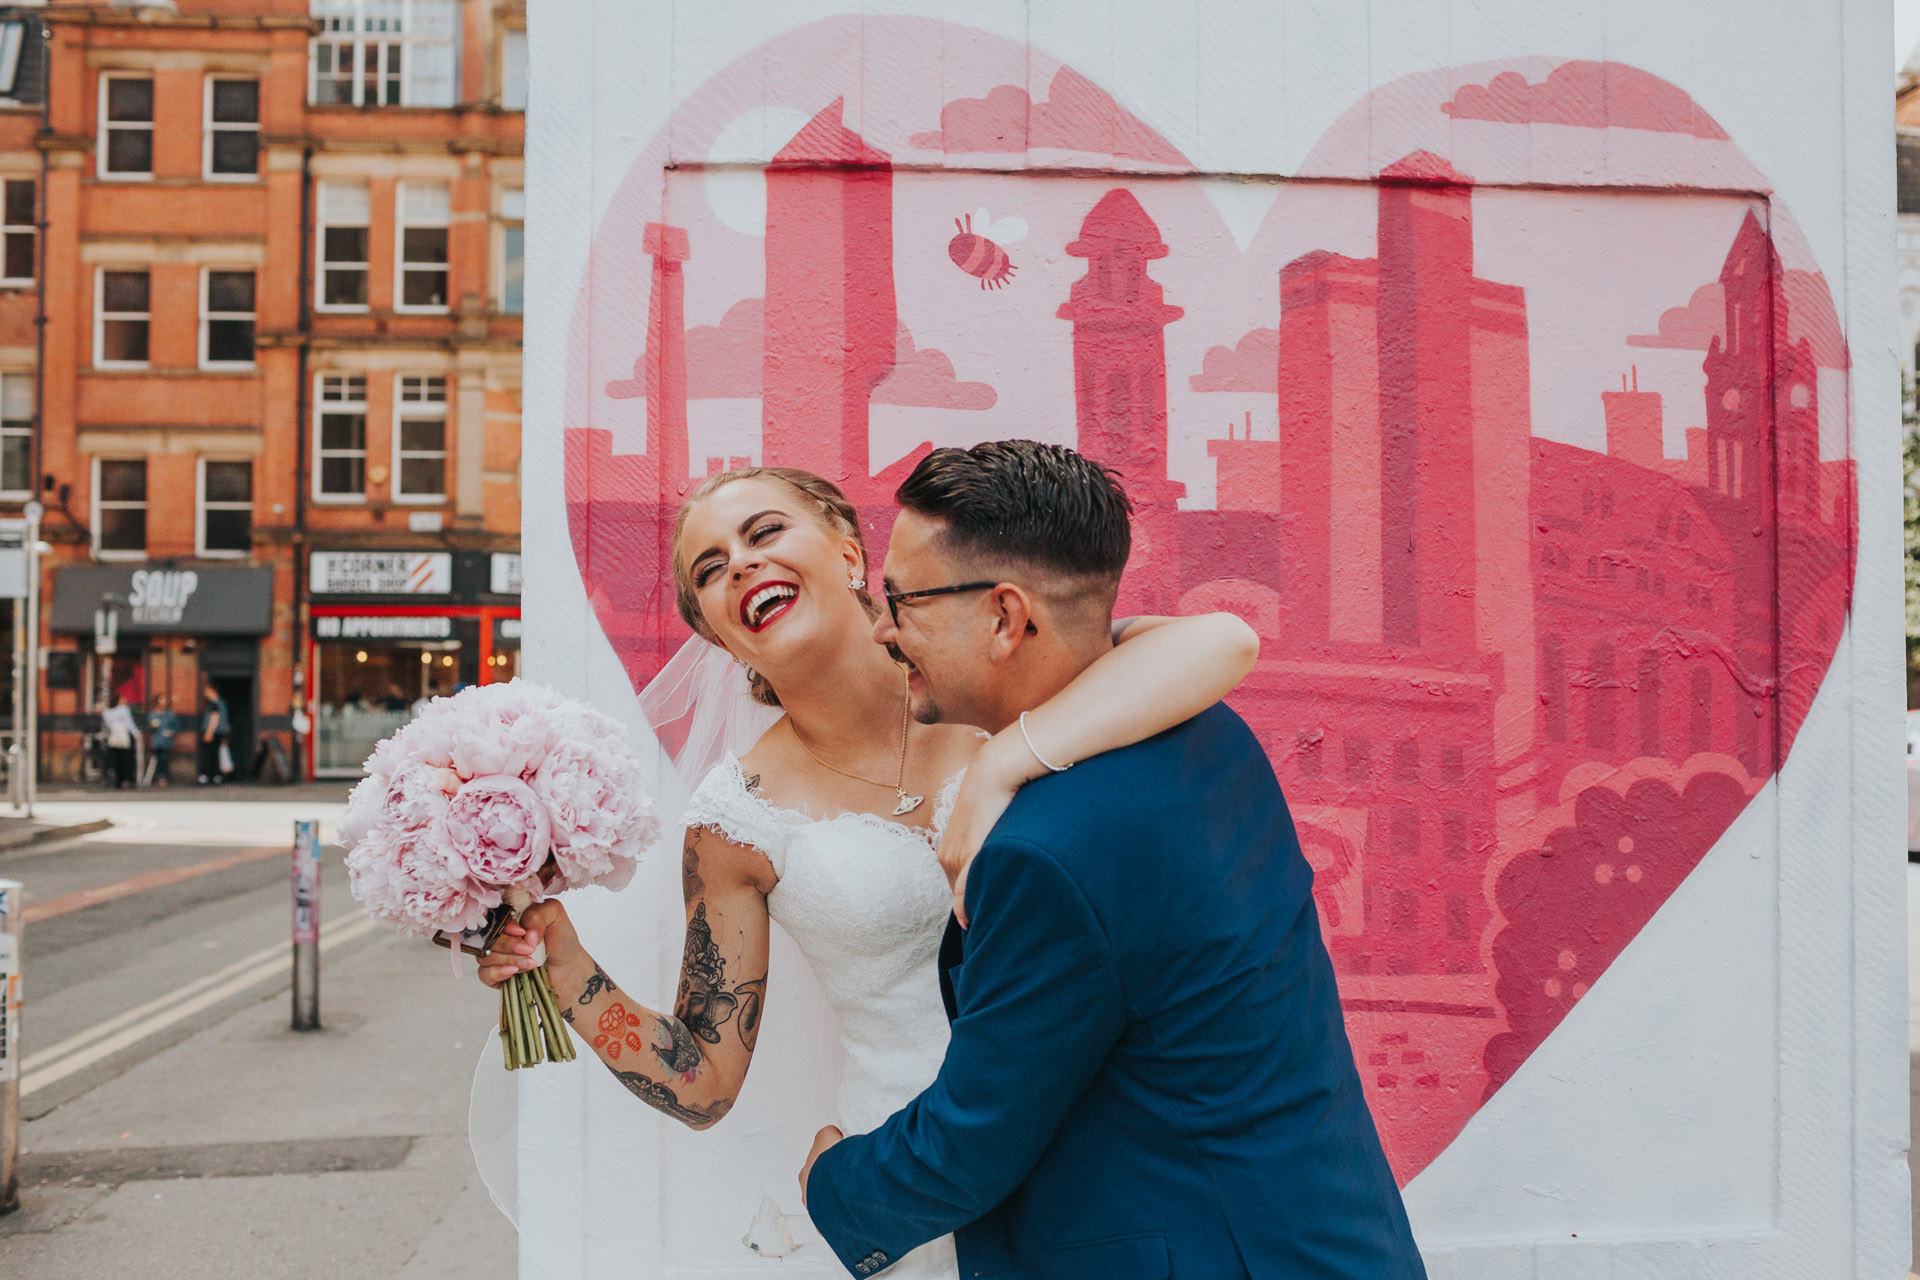 Bride and groom messing around on their wedding day in the Northern Quarter, Manchester. 